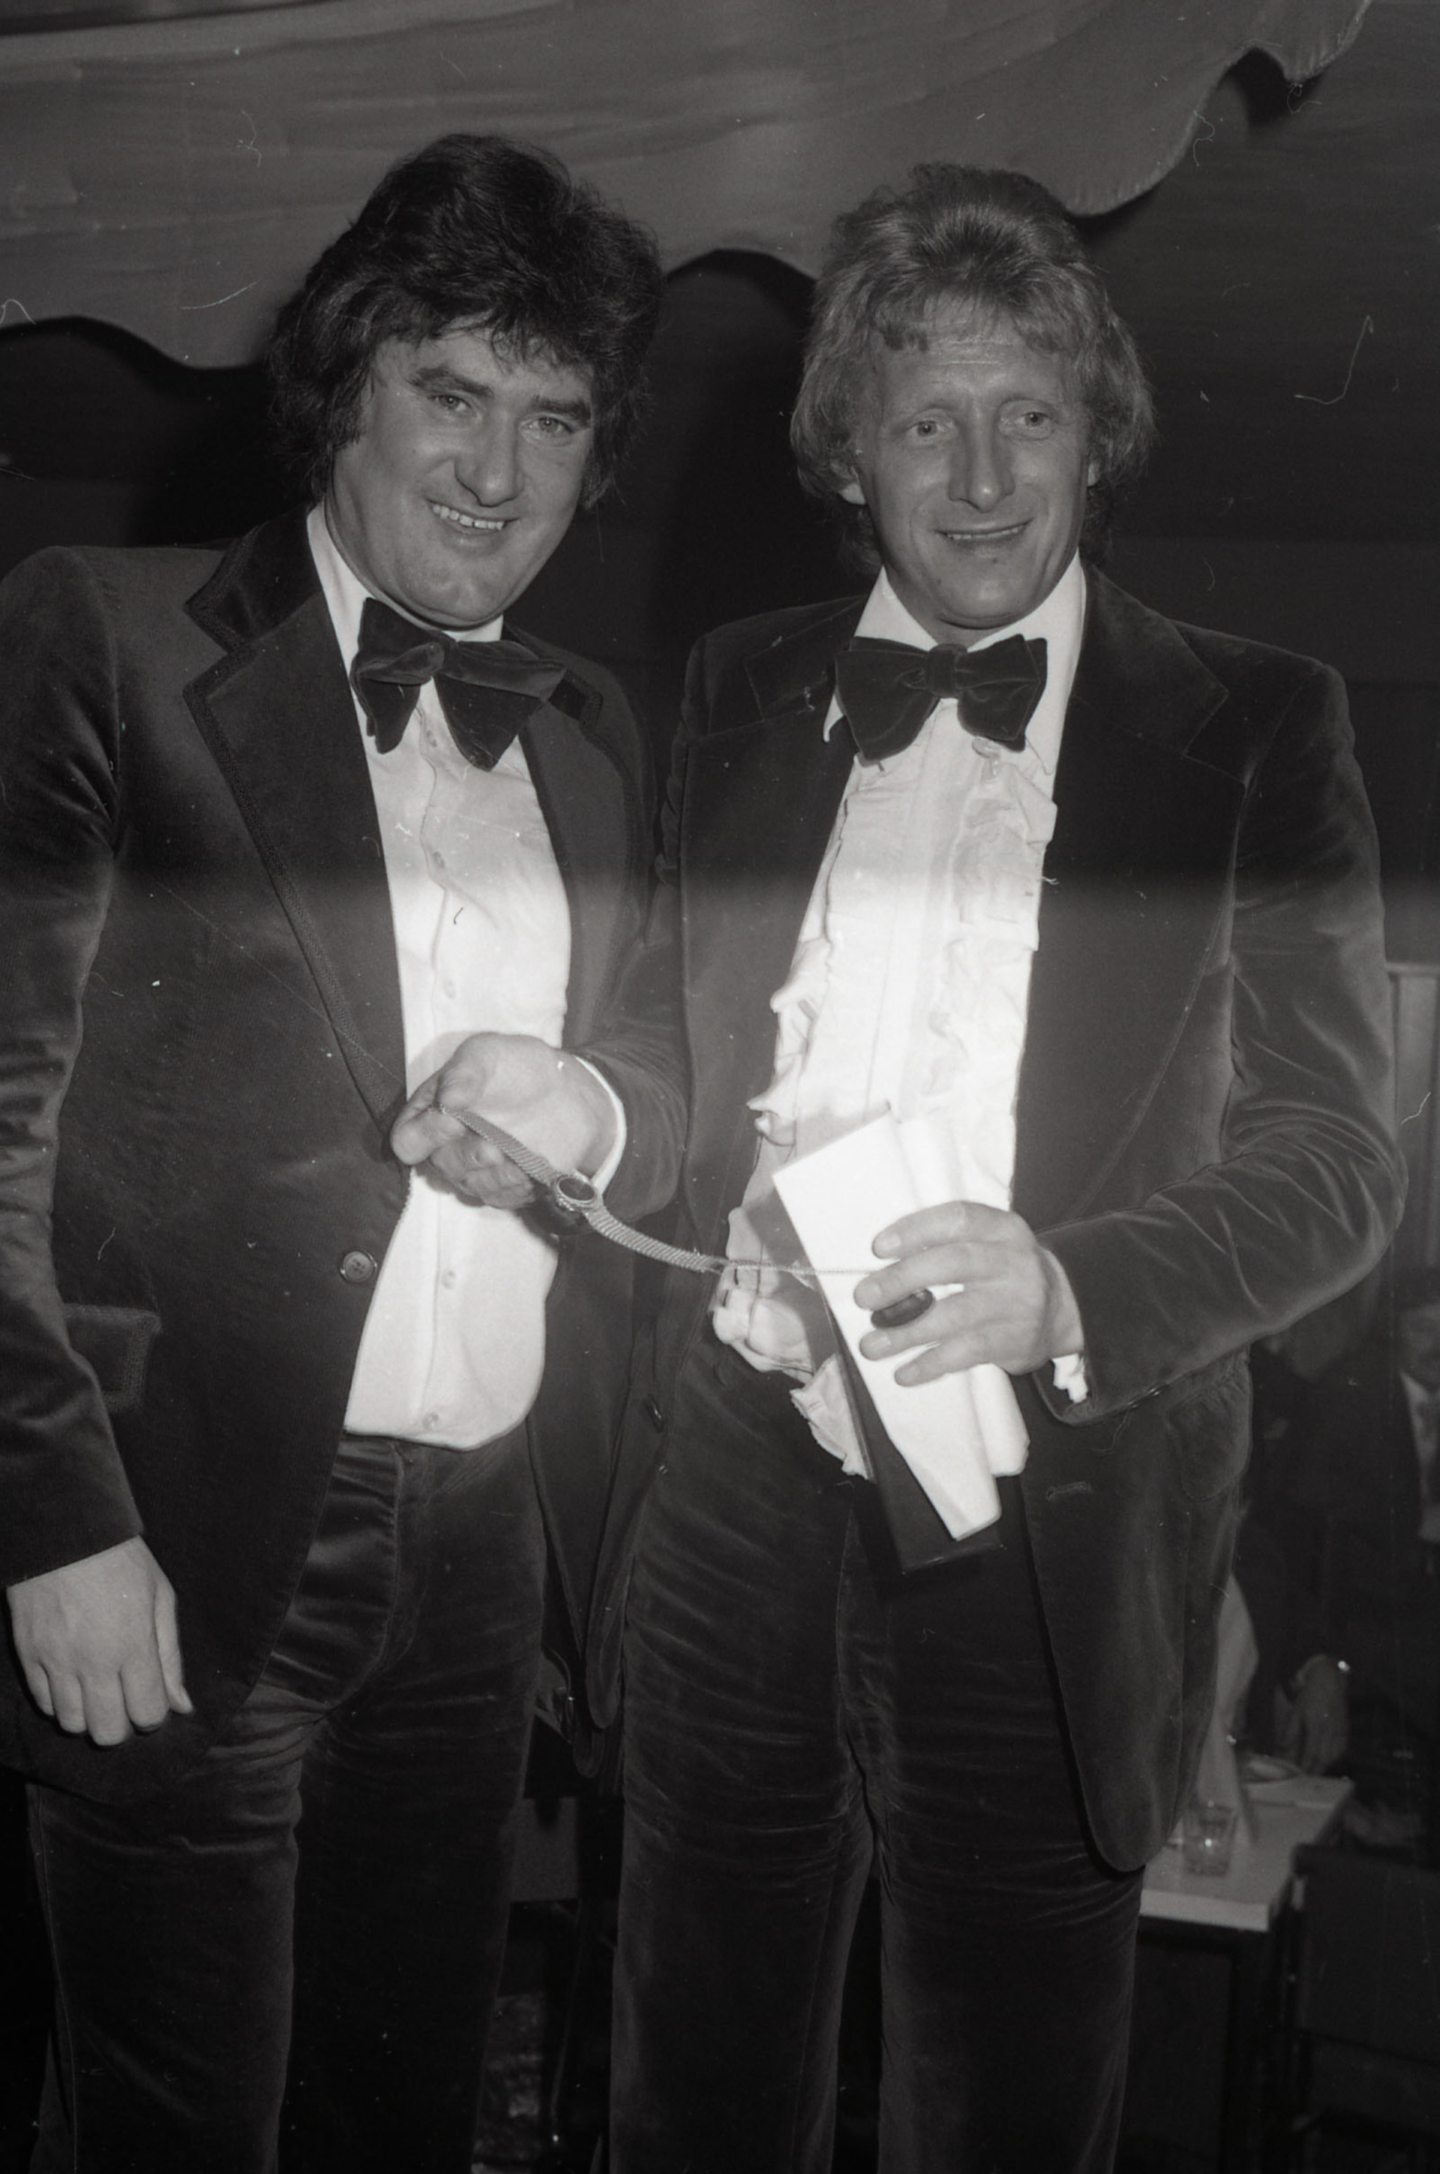 Jim Baxter joins Law in Hamilton in 1978 where a tribute evening was being held in Law's honour.